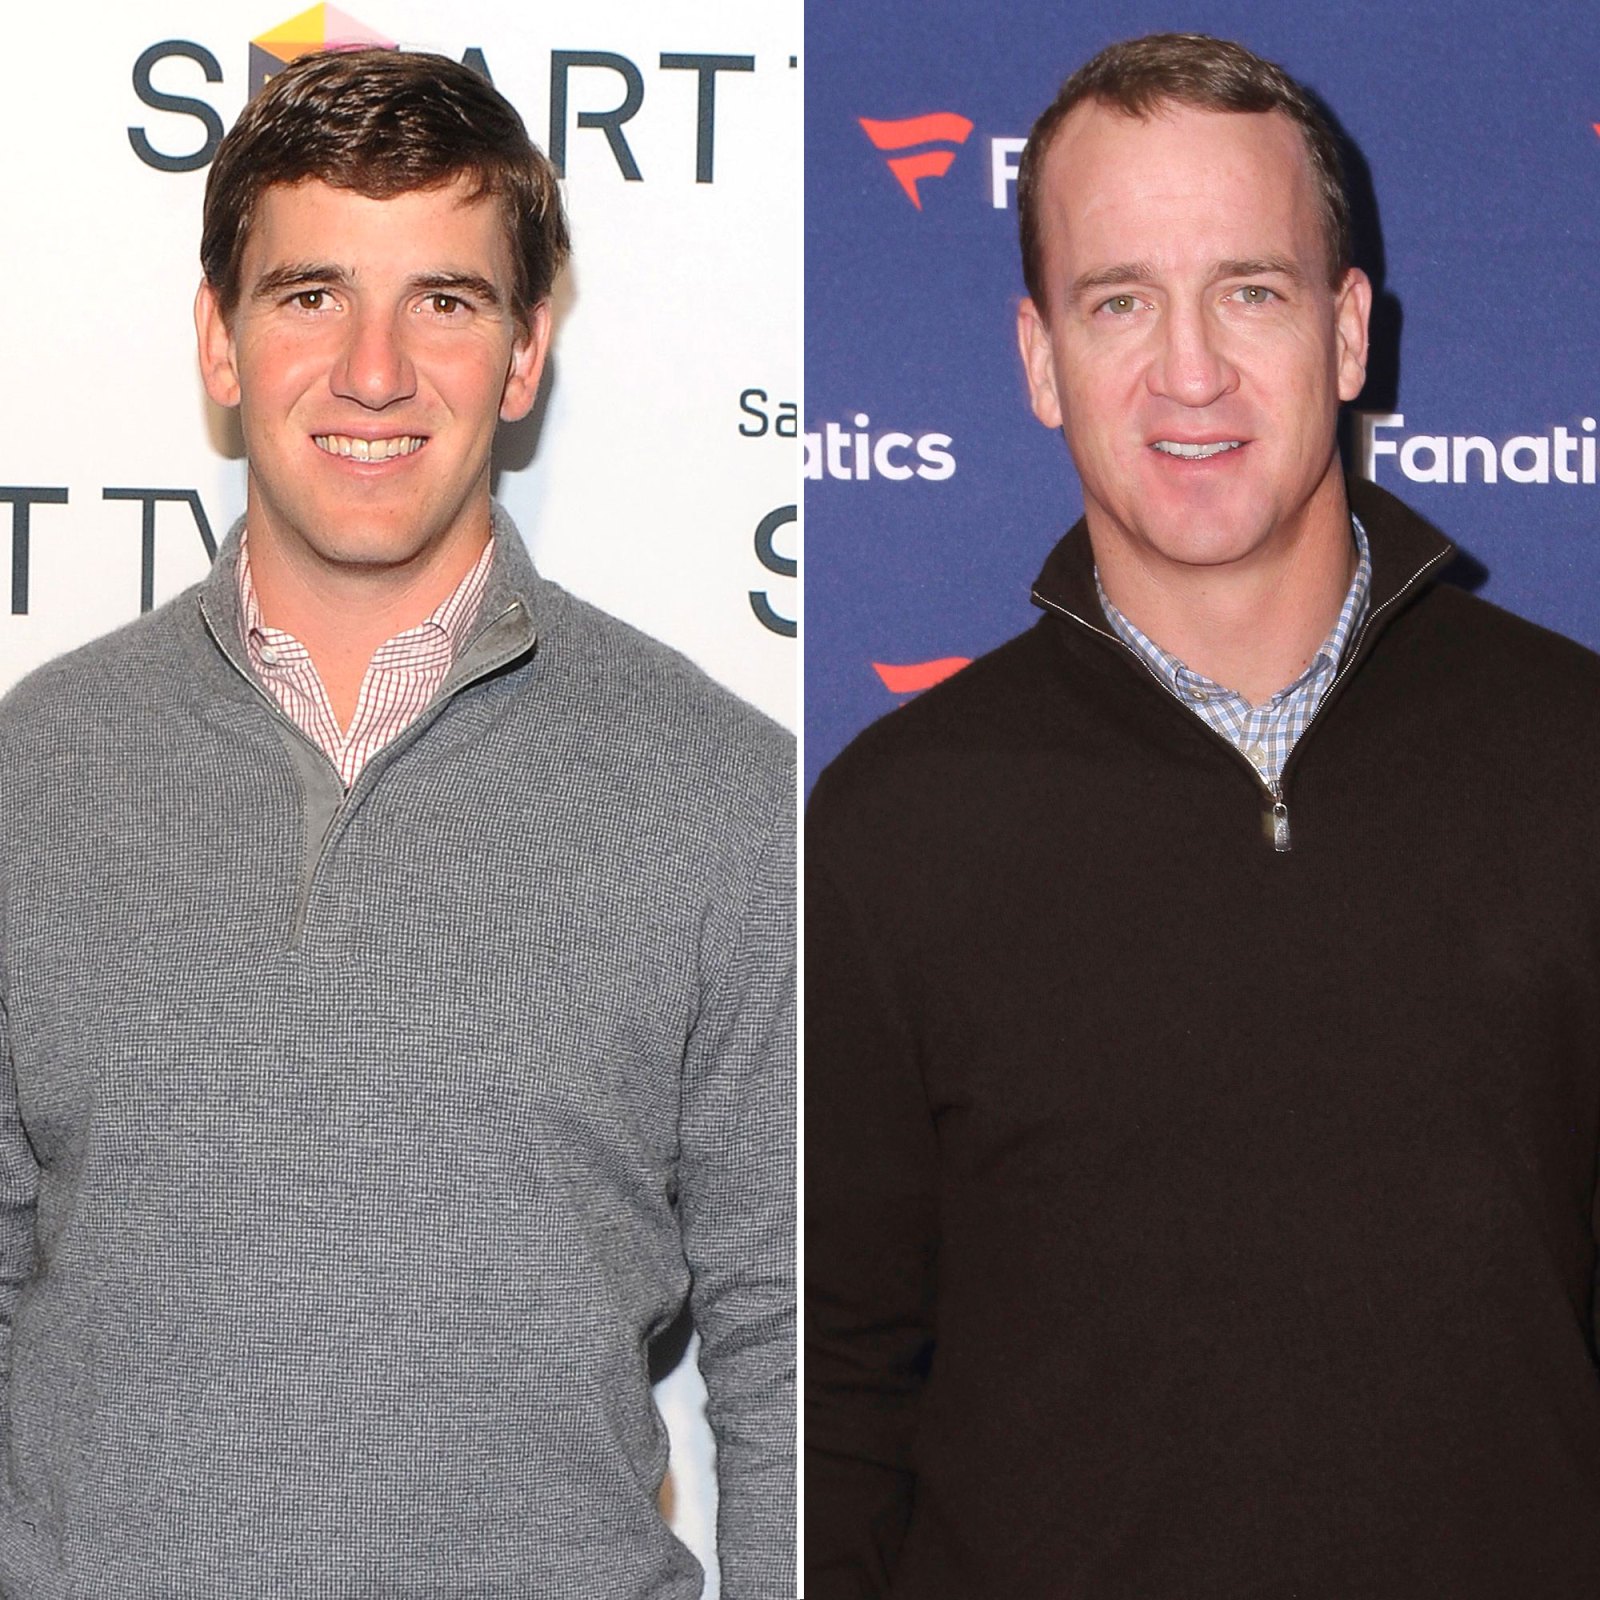 Eli Manning and Peyton Manning Sweetest Photos With Their Kids